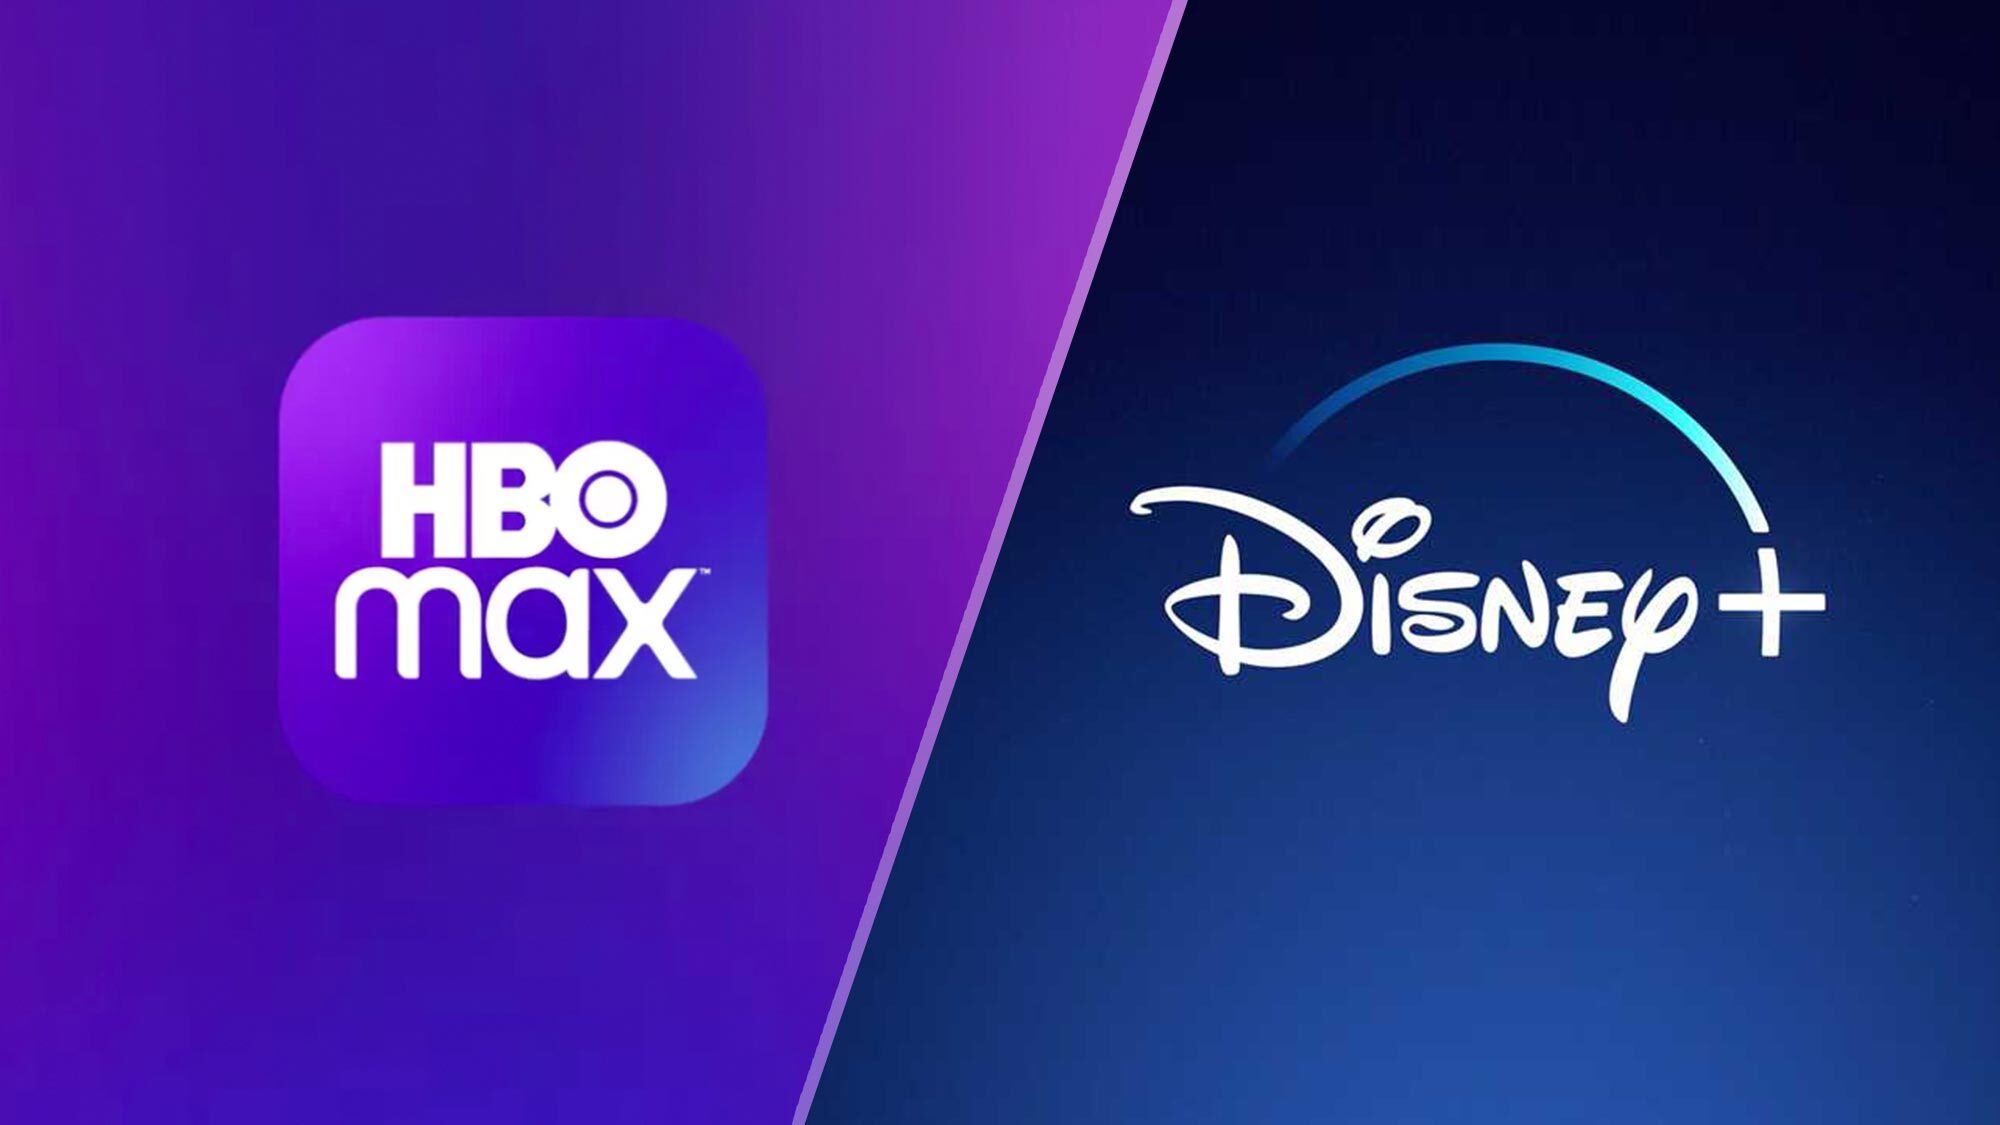 Disney+ Claims An Early Victory Over HBO Max In The Streaming Wars